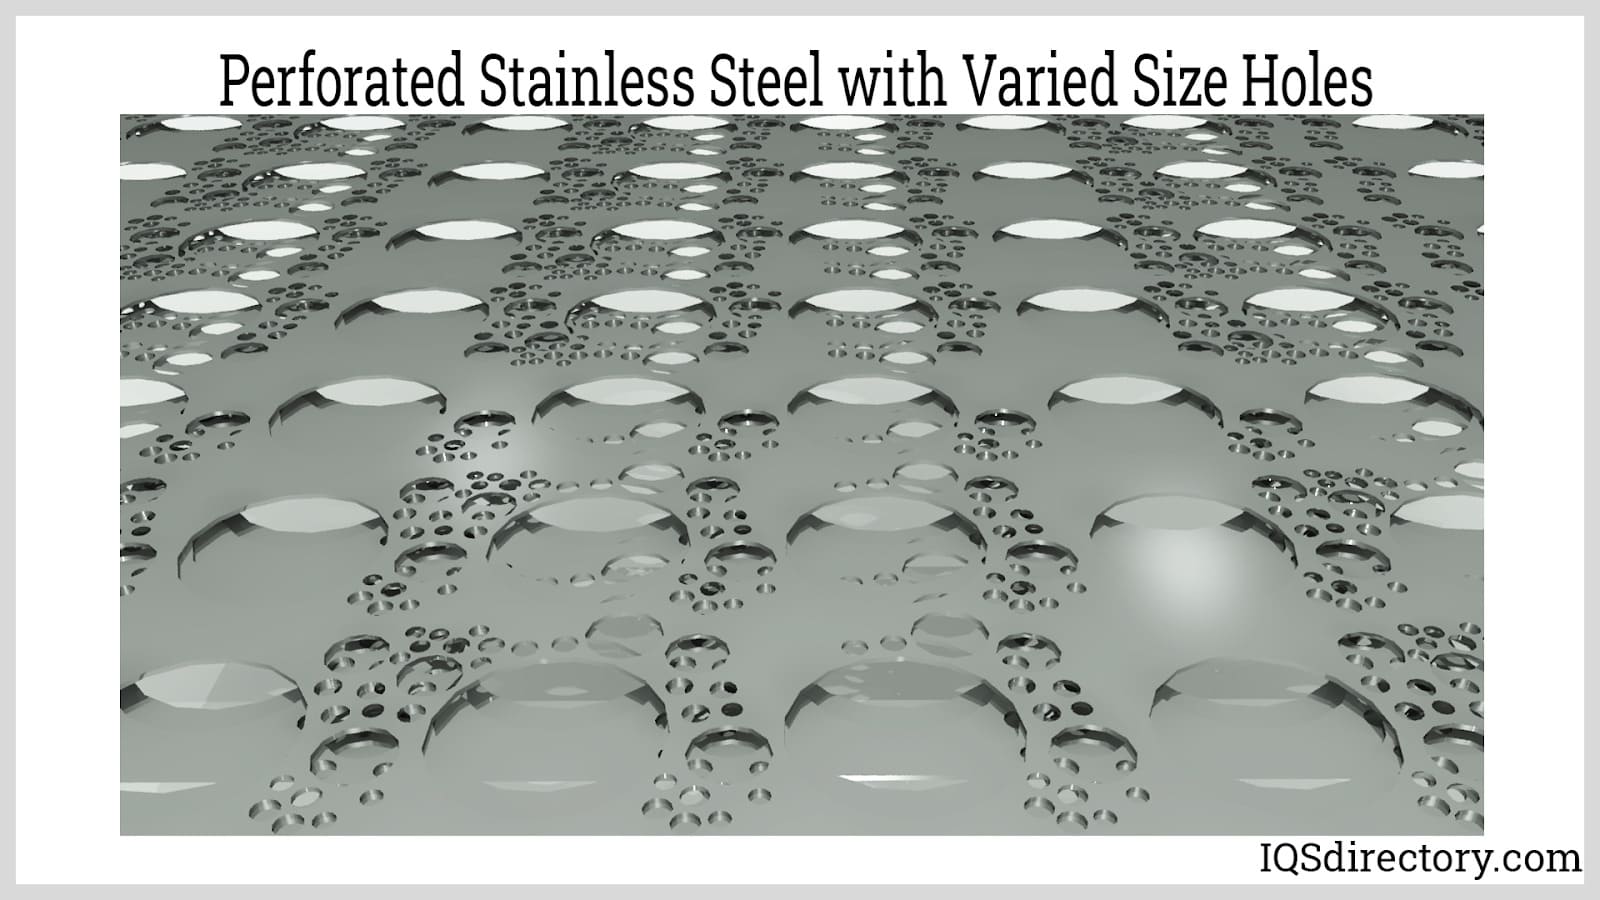 Perforated Stainless Steel with Varied Size Holes